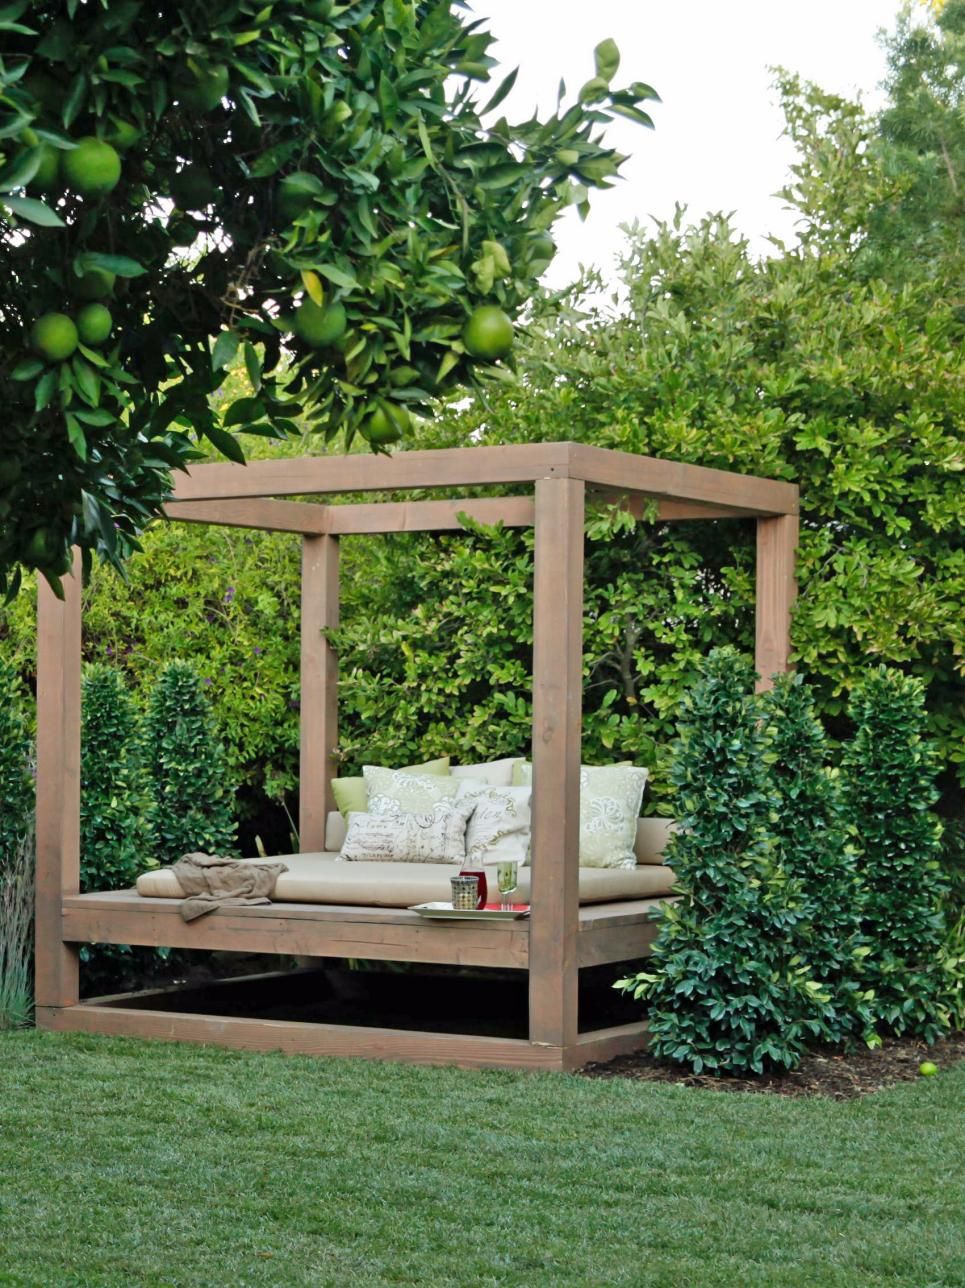 The Ultimate Relaxation Spot: A Stylish Outdoor Daybed with Canopy